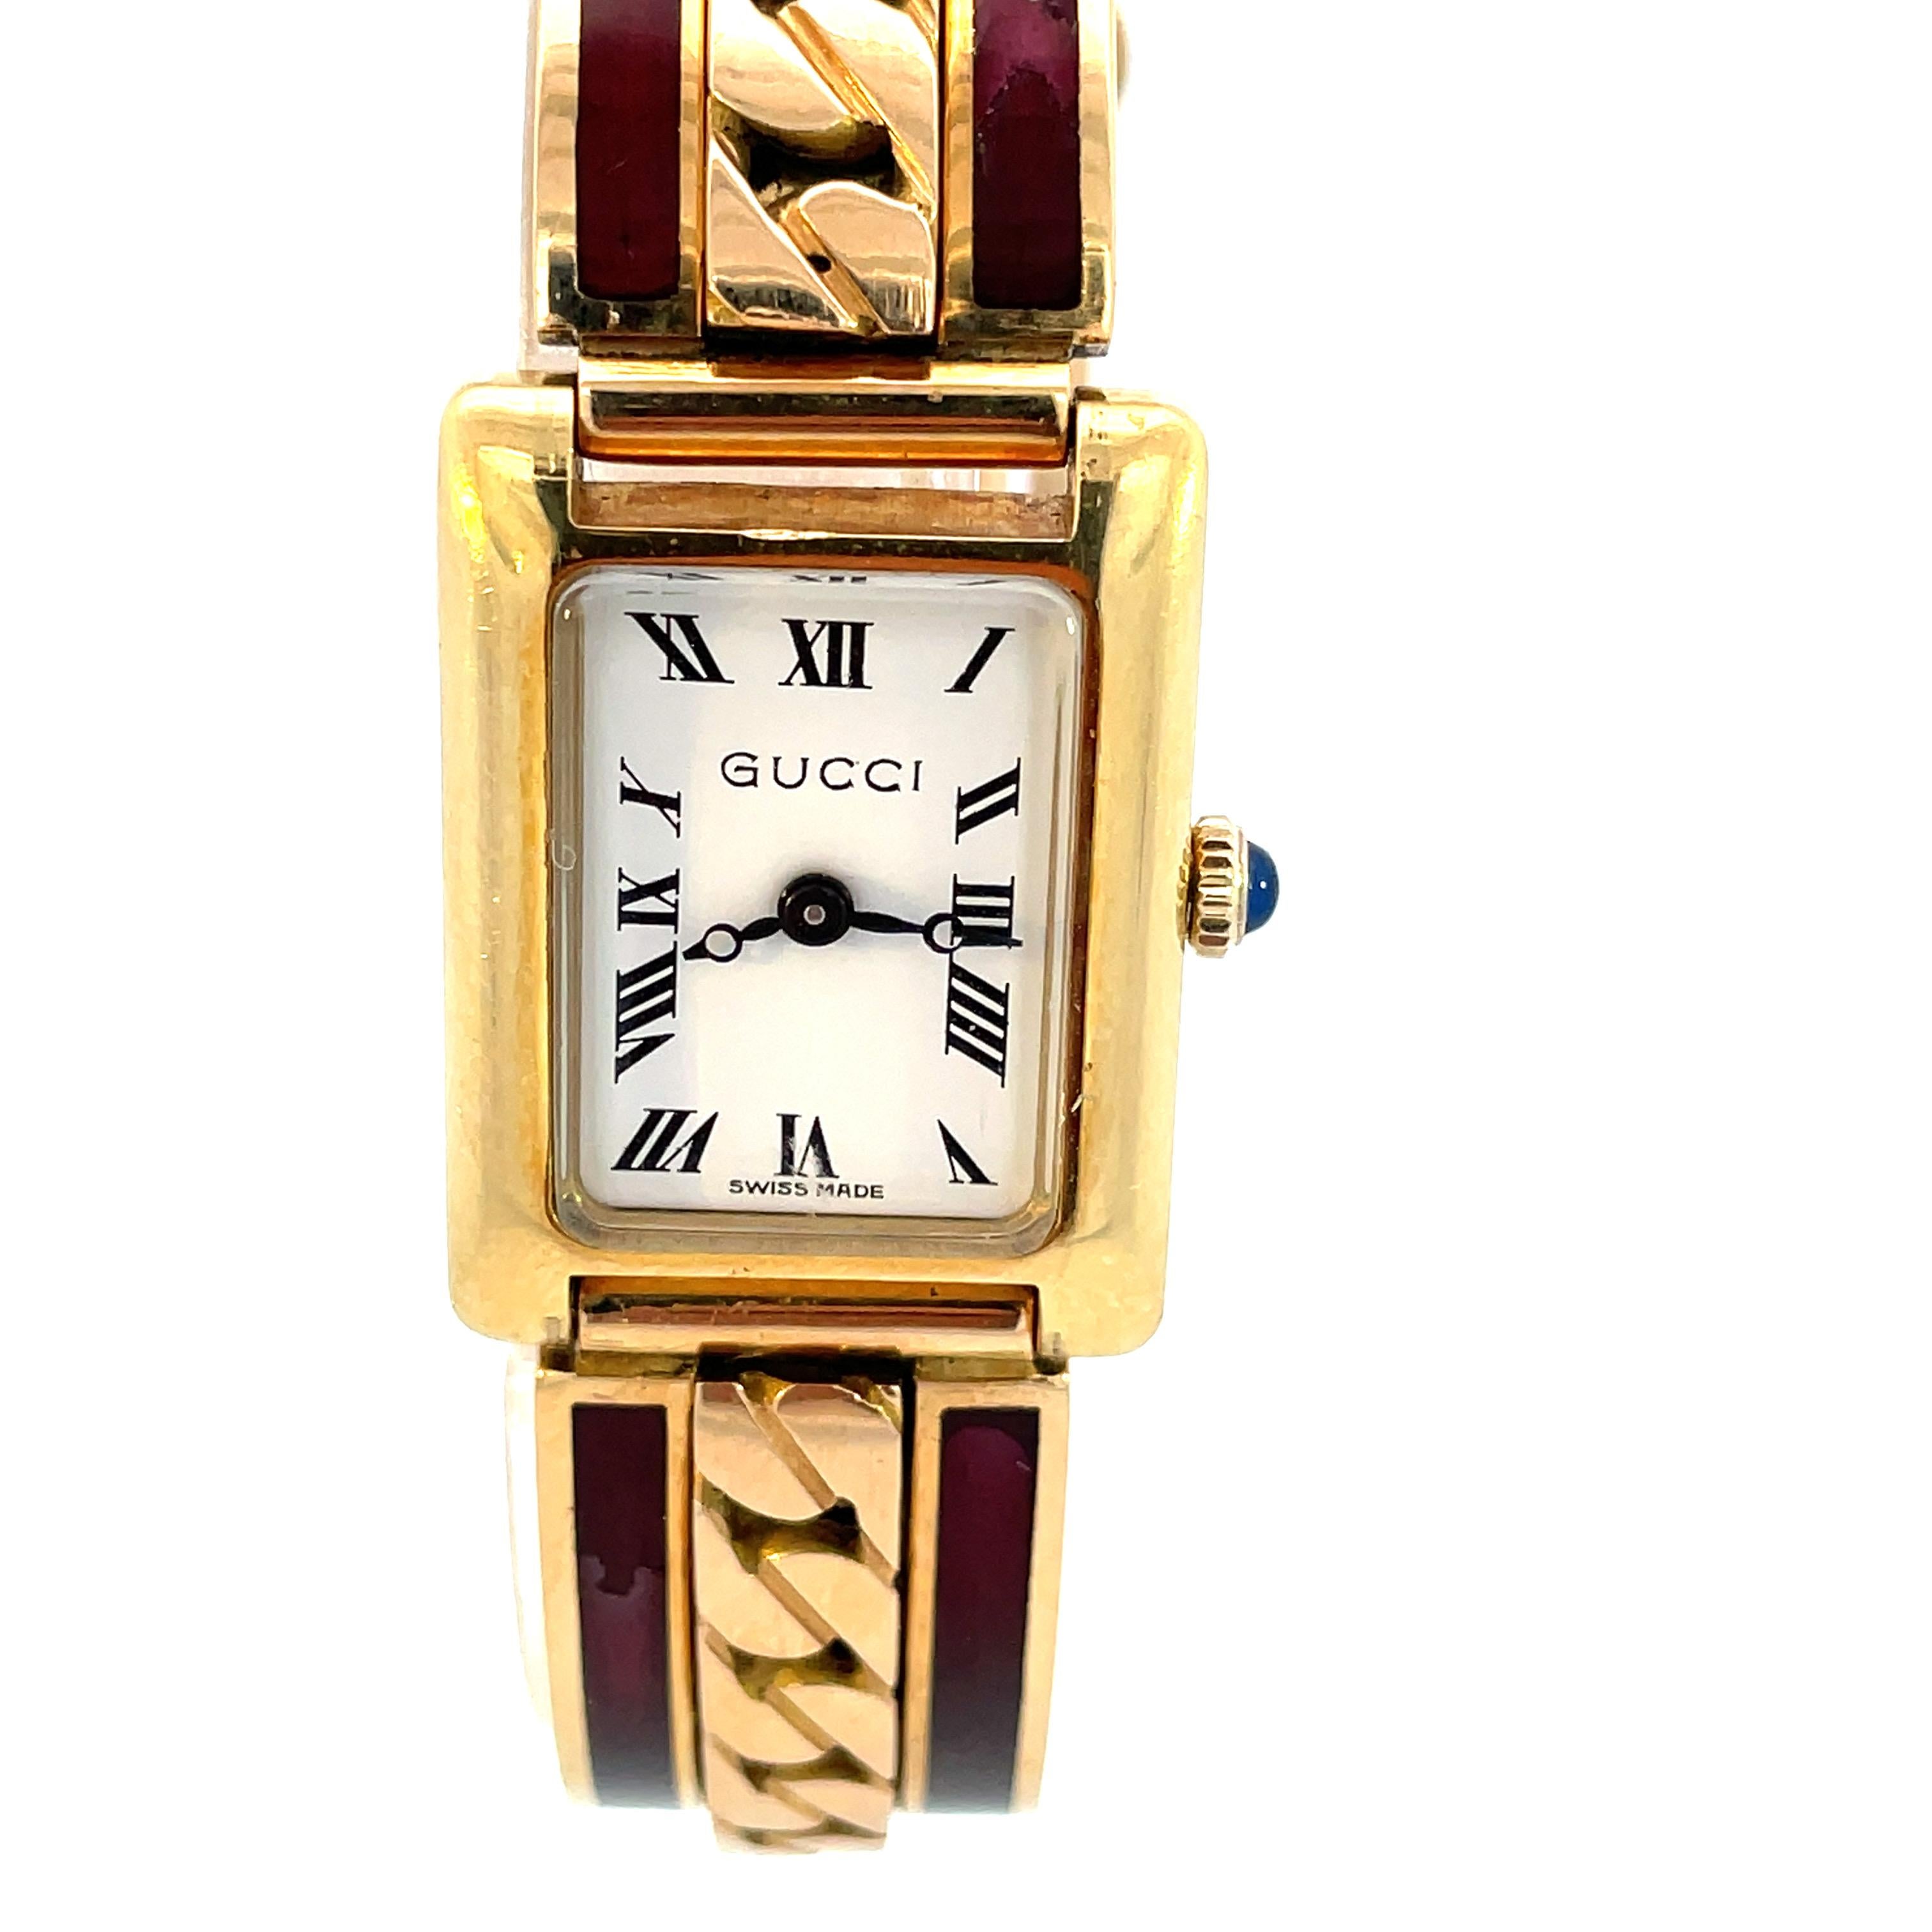 Rare Gucci Bracelet Buckle Watch in yellow gold 18kt and Bordeaux enamel.
White Dial with Roman Numbers,Rectangular case with cabochon Sapphire winding.
Manual Winding movement, Signed Gucci Italy. 1970`s
Cm 17 x 2 adjustable size
`
Weight 104 grams